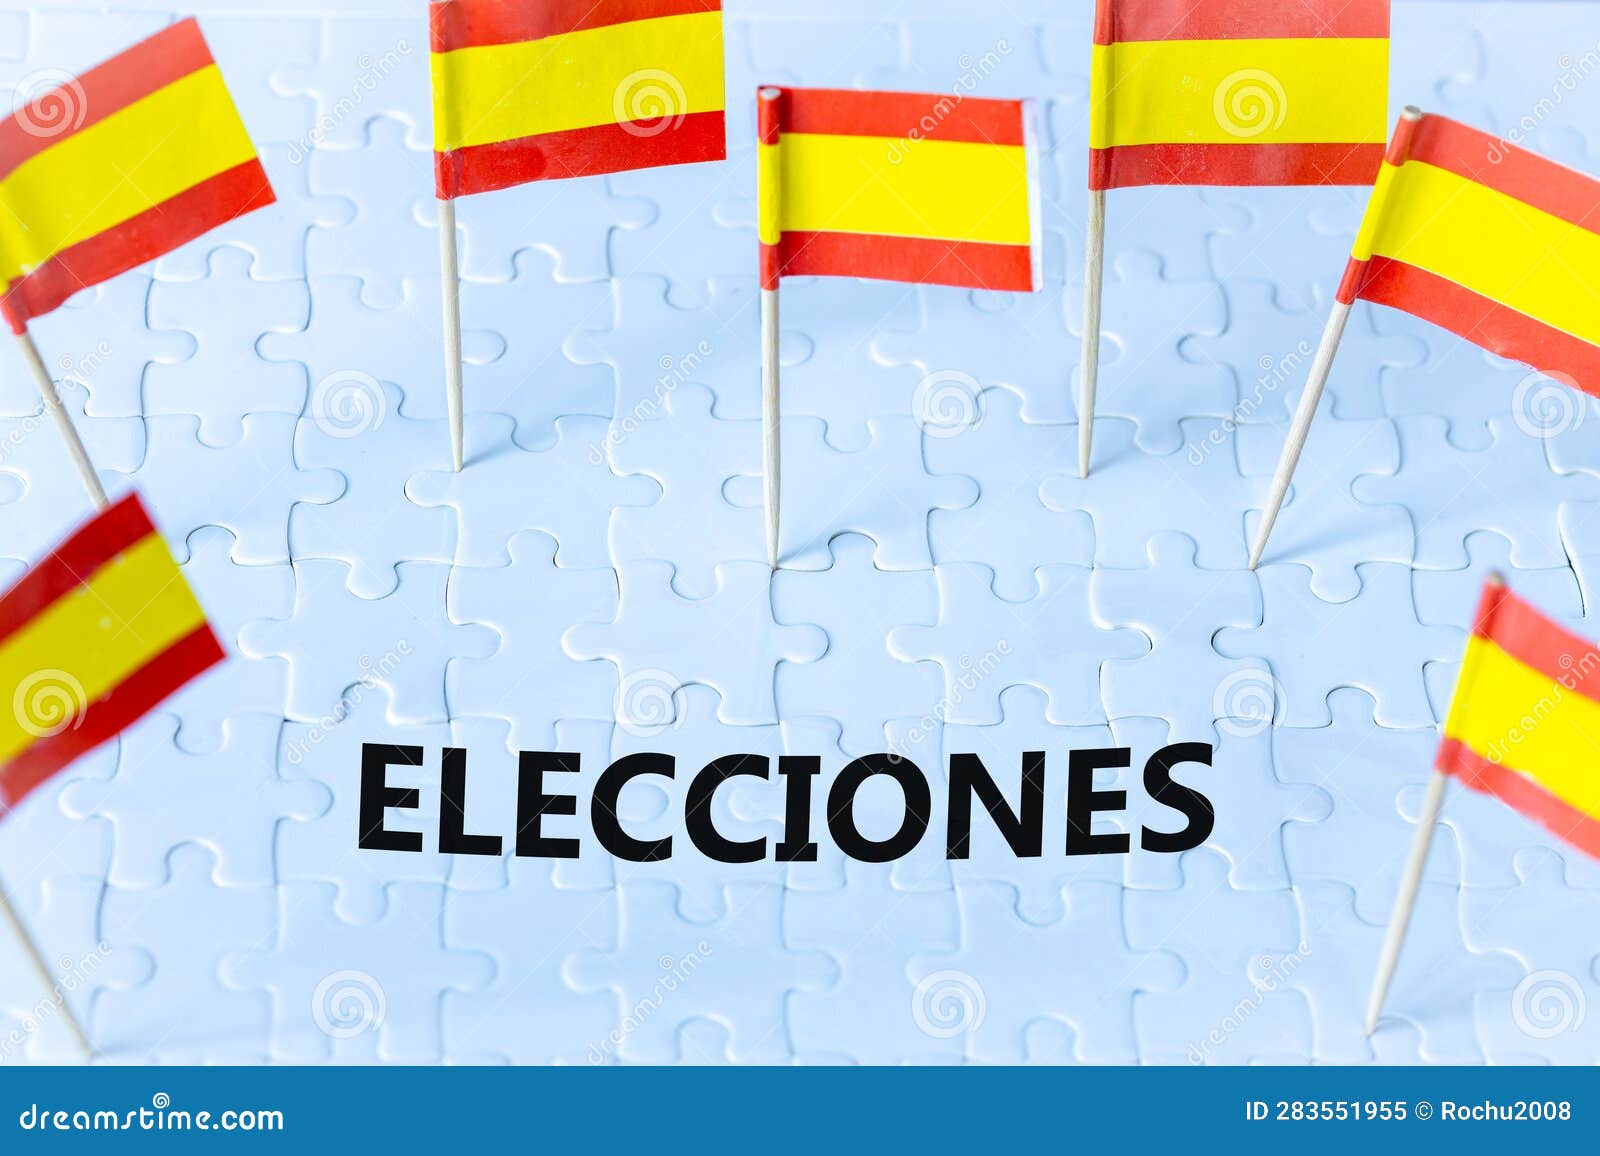 elections in spain, the concept of the spanish flag and the text elecciones meaning vote in english on white puzzles